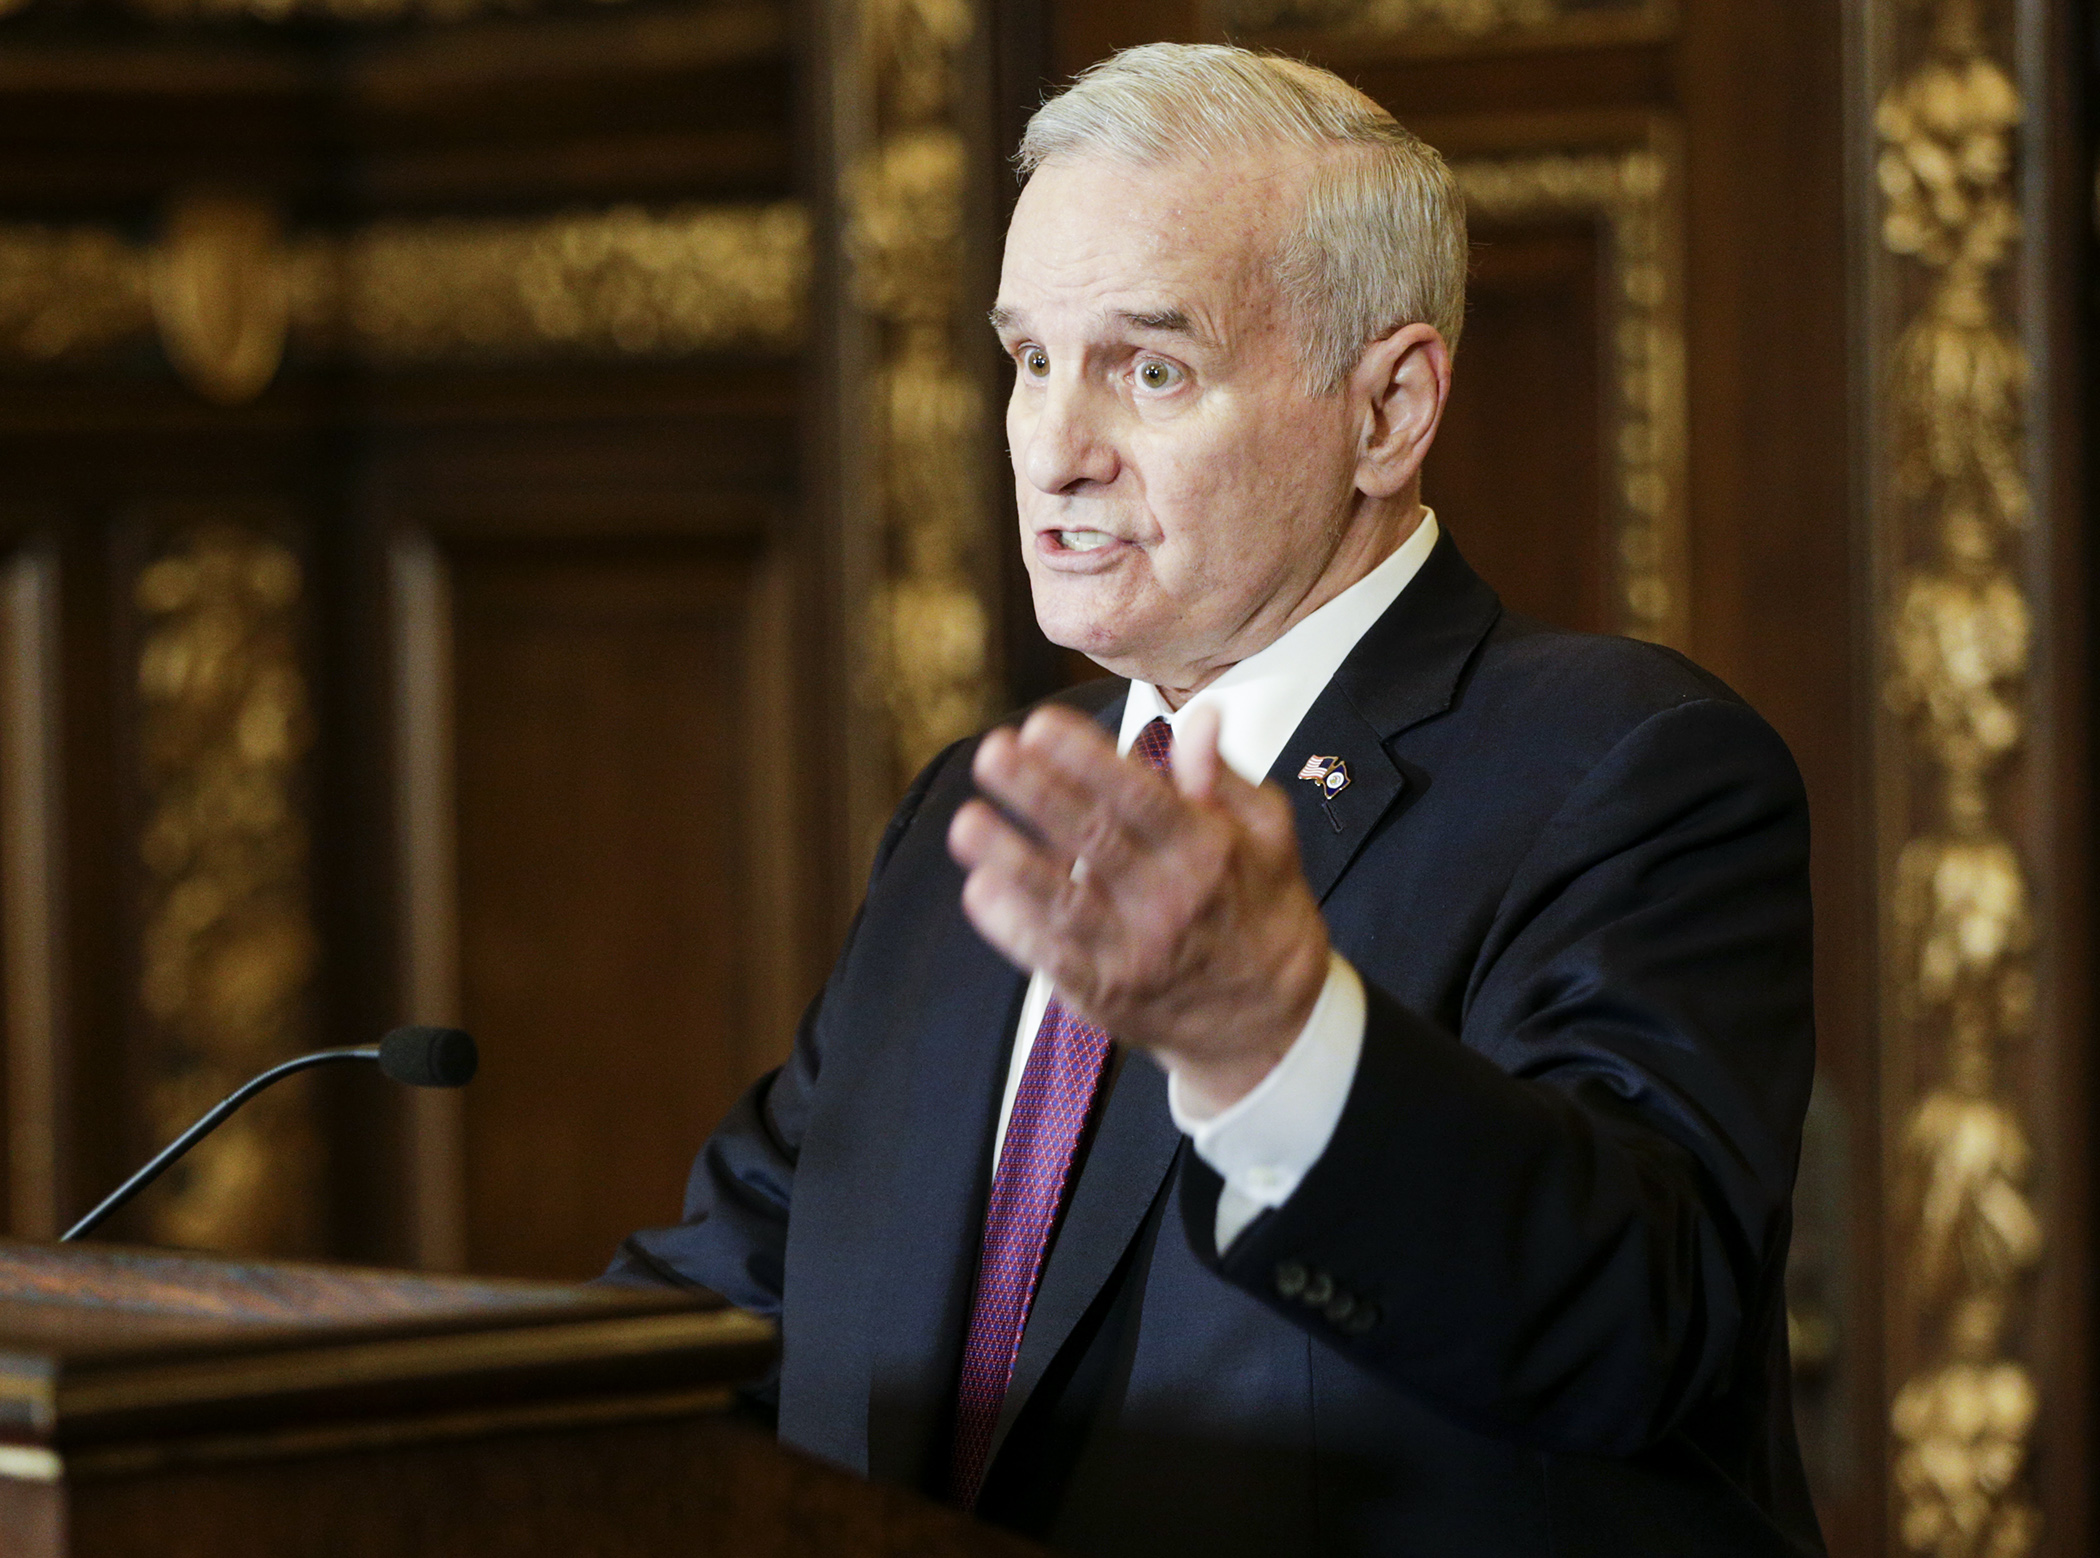 Gov. Mark Dayton answers a question at an April 3 press conference about his thoughts on letting the reinsurance bill become law without his signature. Photo by Paul Battaglia